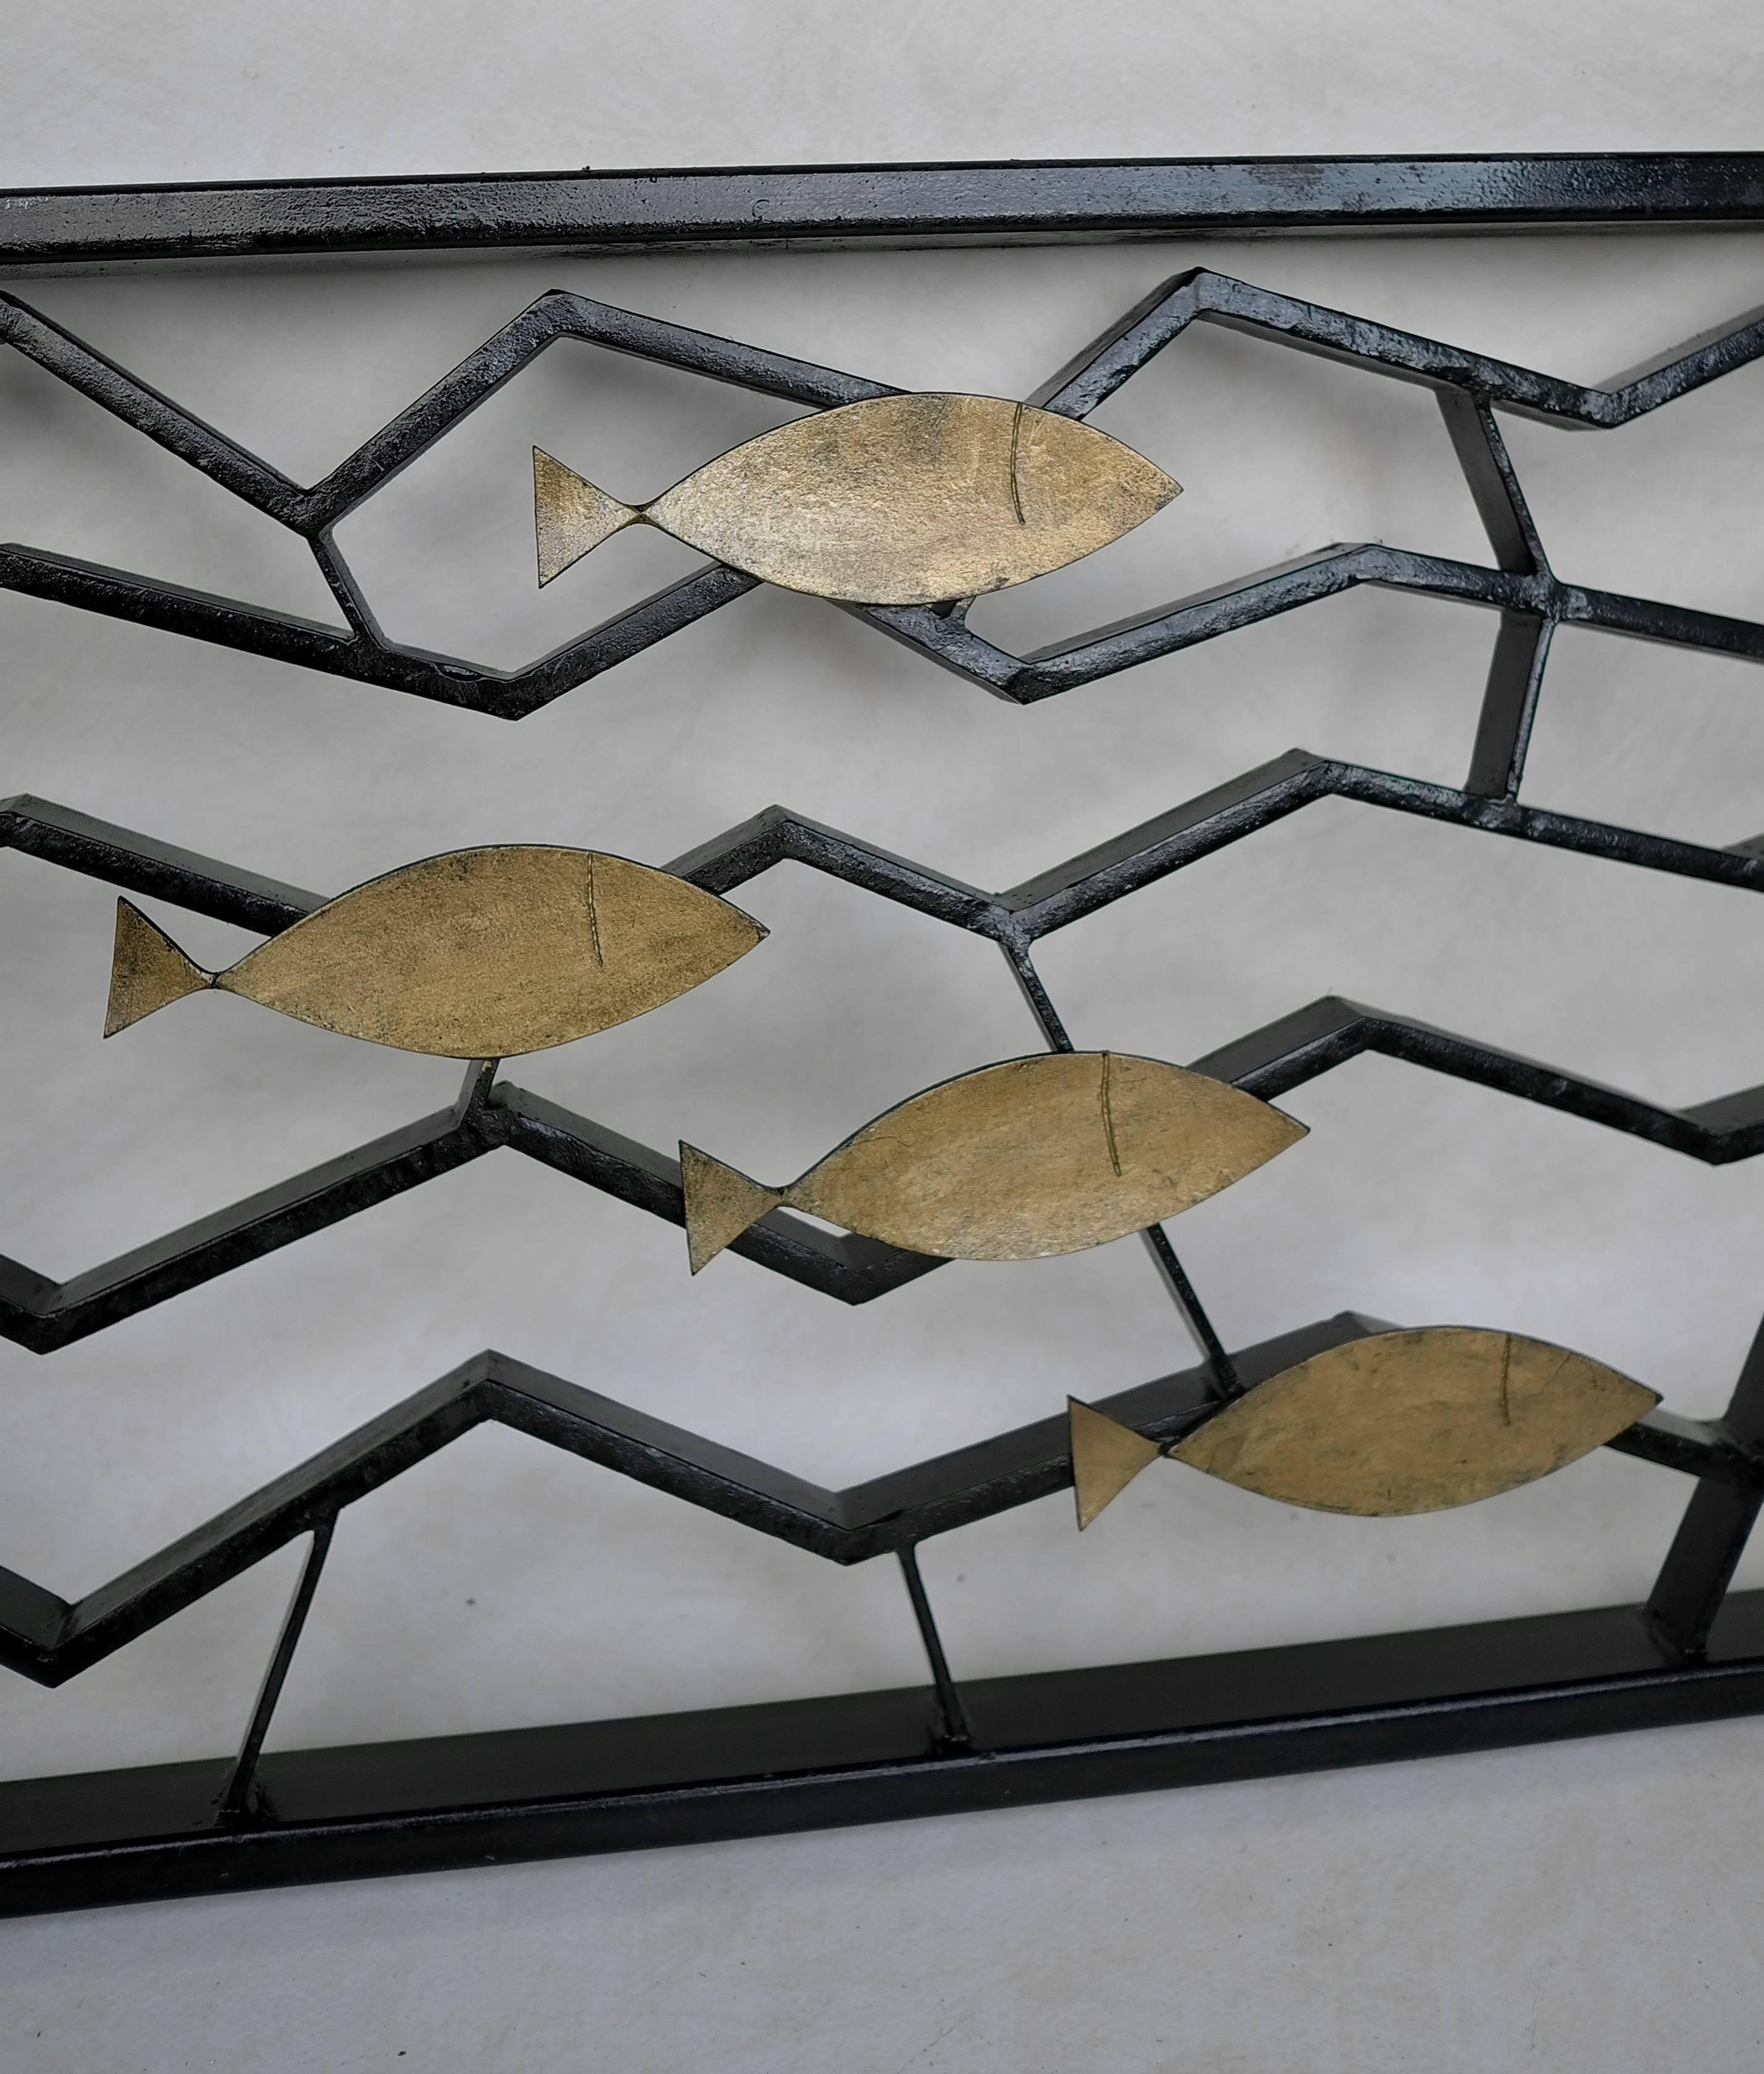 Pair of Metal Geometric fence or art object with golden fish made in Italy, circa 1950s.